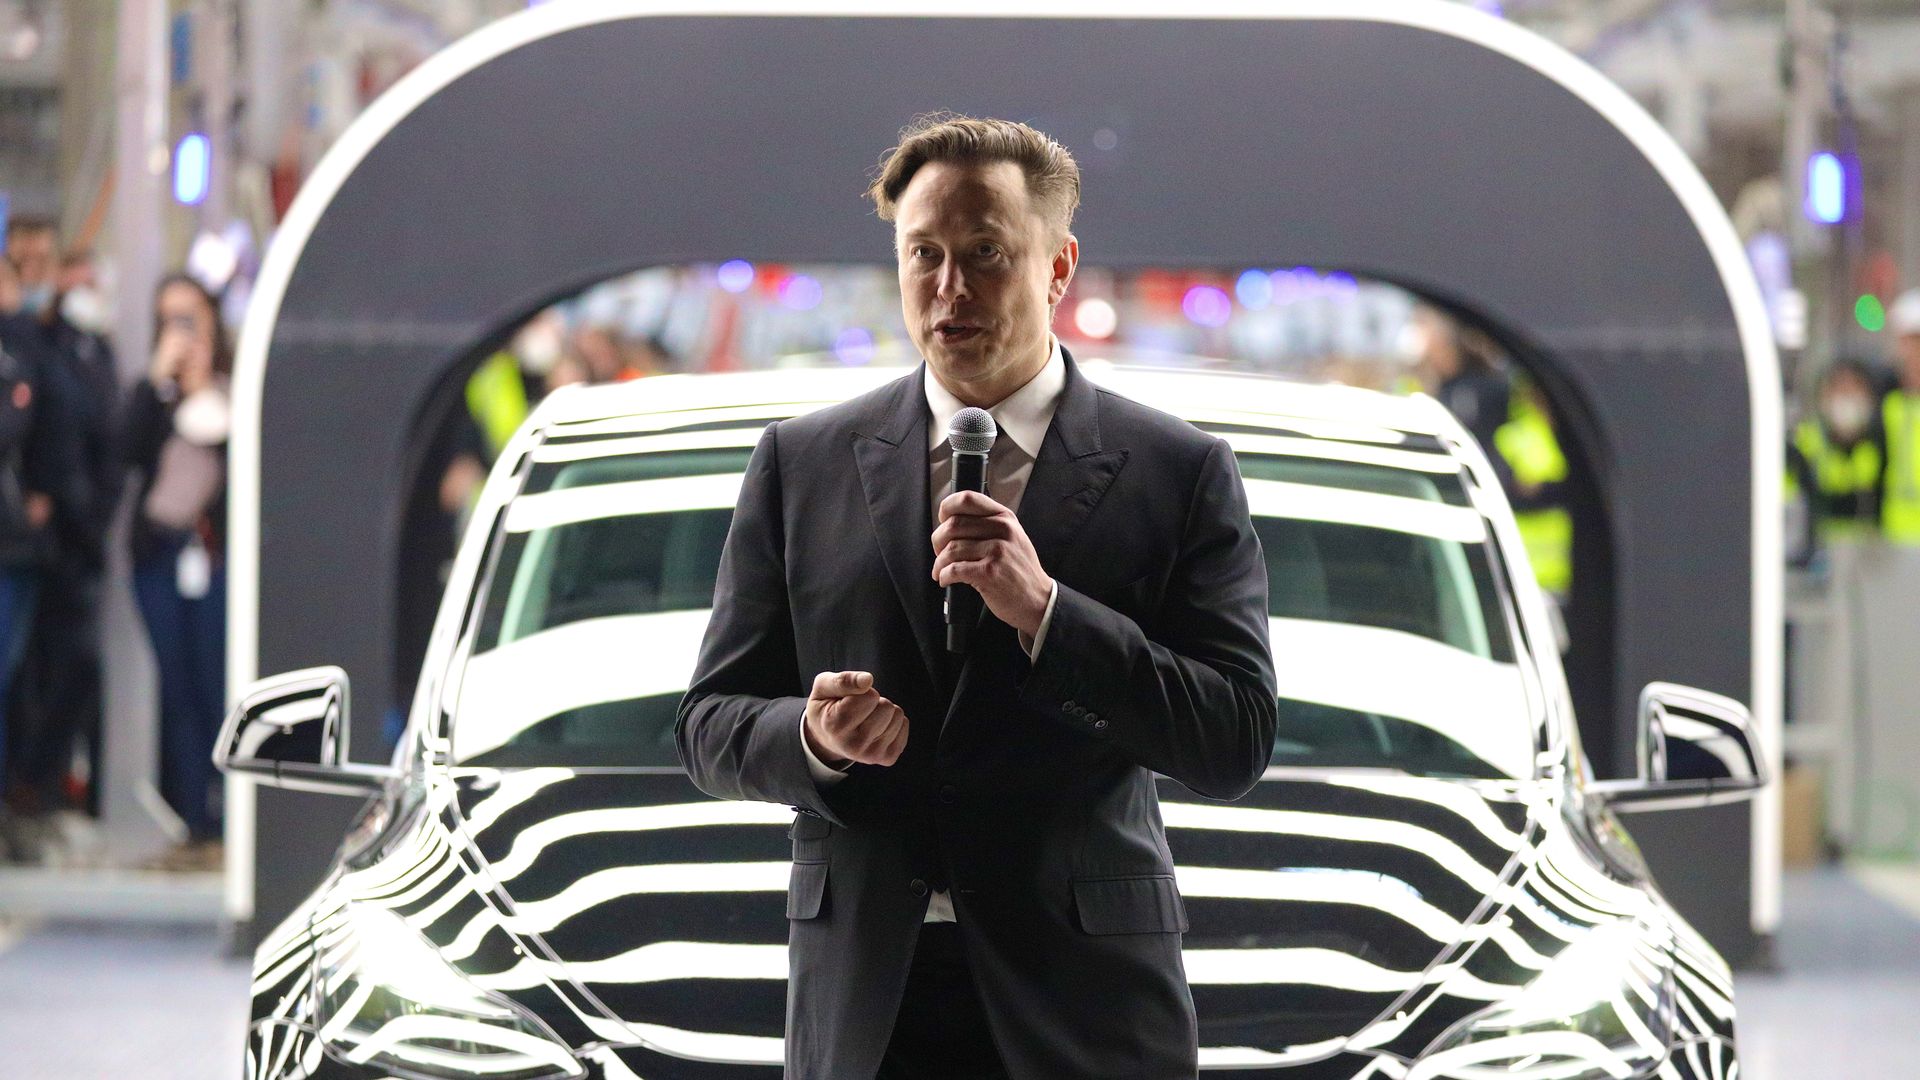 Tesla CEO Elon Musk speaks during the official opening of the new Tesla electric car manufacturing plant on March 22, 2022 near Gruenheide, Germany. 